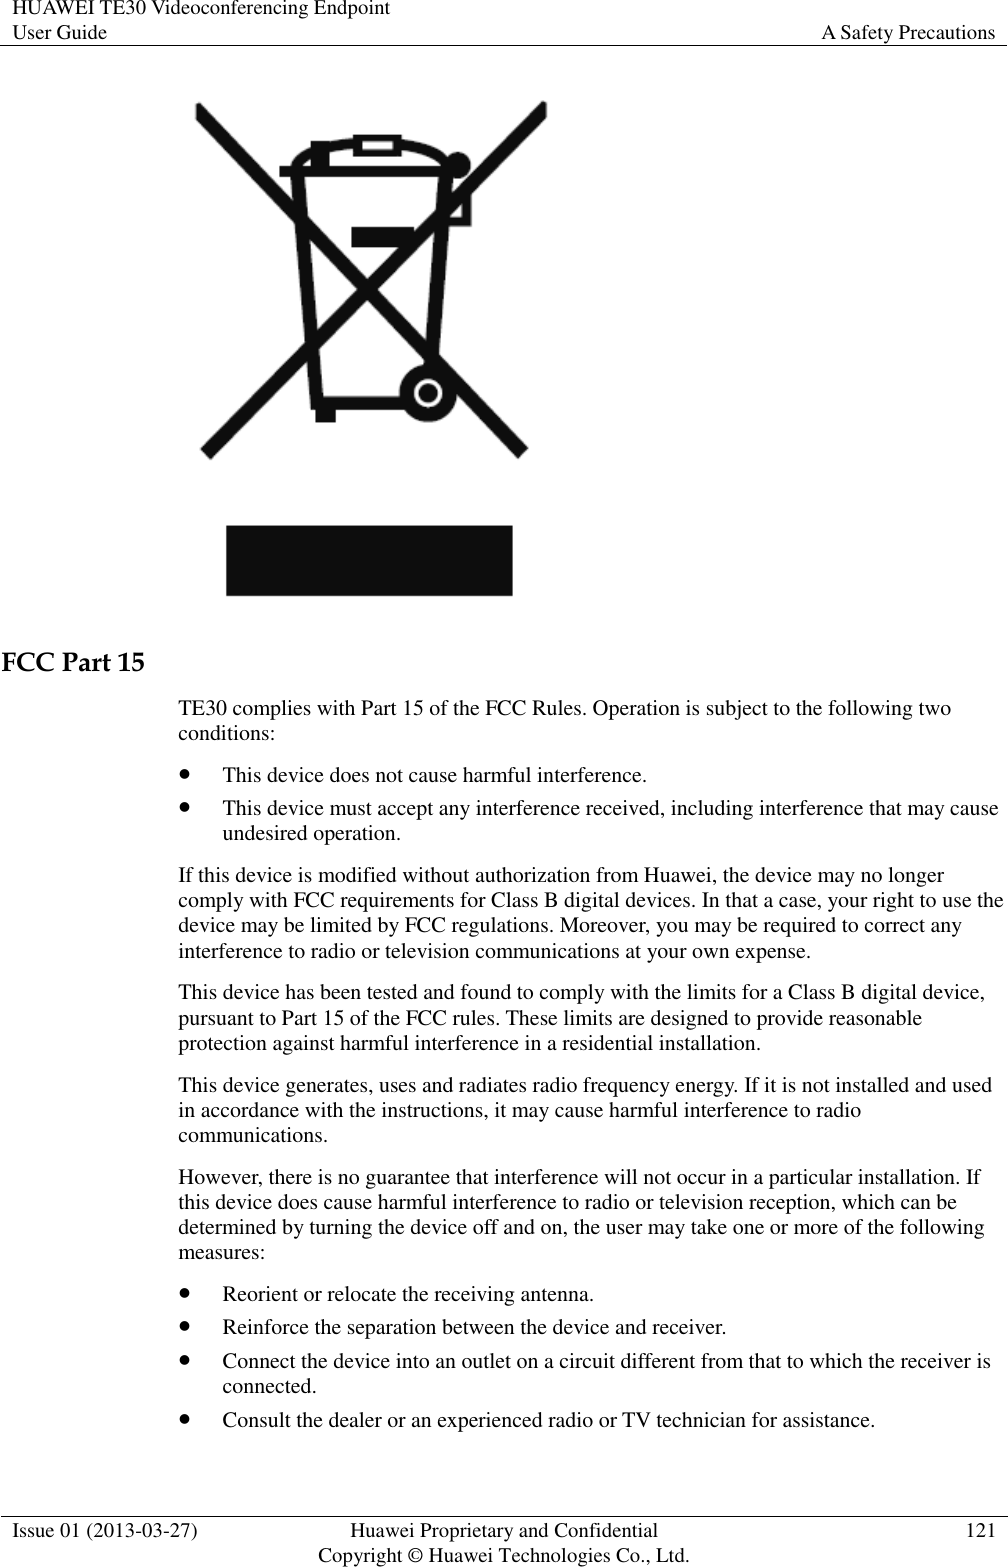 HUAWEI TE30 Videoconferencing Endpoint User Guide A Safety Precautions  Issue 01 (2013-03-27) Huawei Proprietary and Confidential                                     Copyright © Huawei Technologies Co., Ltd. 121   FCC Part 15 TE30 complies with Part 15 of the FCC Rules. Operation is subject to the following two conditions:  This device does not cause harmful interference.  This device must accept any interference received, including interference that may cause undesired operation. If this device is modified without authorization from Huawei, the device may no longer comply with FCC requirements for Class B digital devices. In that a case, your right to use the device may be limited by FCC regulations. Moreover, you may be required to correct any interference to radio or television communications at your own expense. This device has been tested and found to comply with the limits for a Class B digital device, pursuant to Part 15 of the FCC rules. These limits are designed to provide reasonable protection against harmful interference in a residential installation. This device generates, uses and radiates radio frequency energy. If it is not installed and used in accordance with the instructions, it may cause harmful interference to radio communications. However, there is no guarantee that interference will not occur in a particular installation. If this device does cause harmful interference to radio or television reception, which can be determined by turning the device off and on, the user may take one or more of the following measures:  Reorient or relocate the receiving antenna.  Reinforce the separation between the device and receiver.  Connect the device into an outlet on a circuit different from that to which the receiver is connected.  Consult the dealer or an experienced radio or TV technician for assistance. 